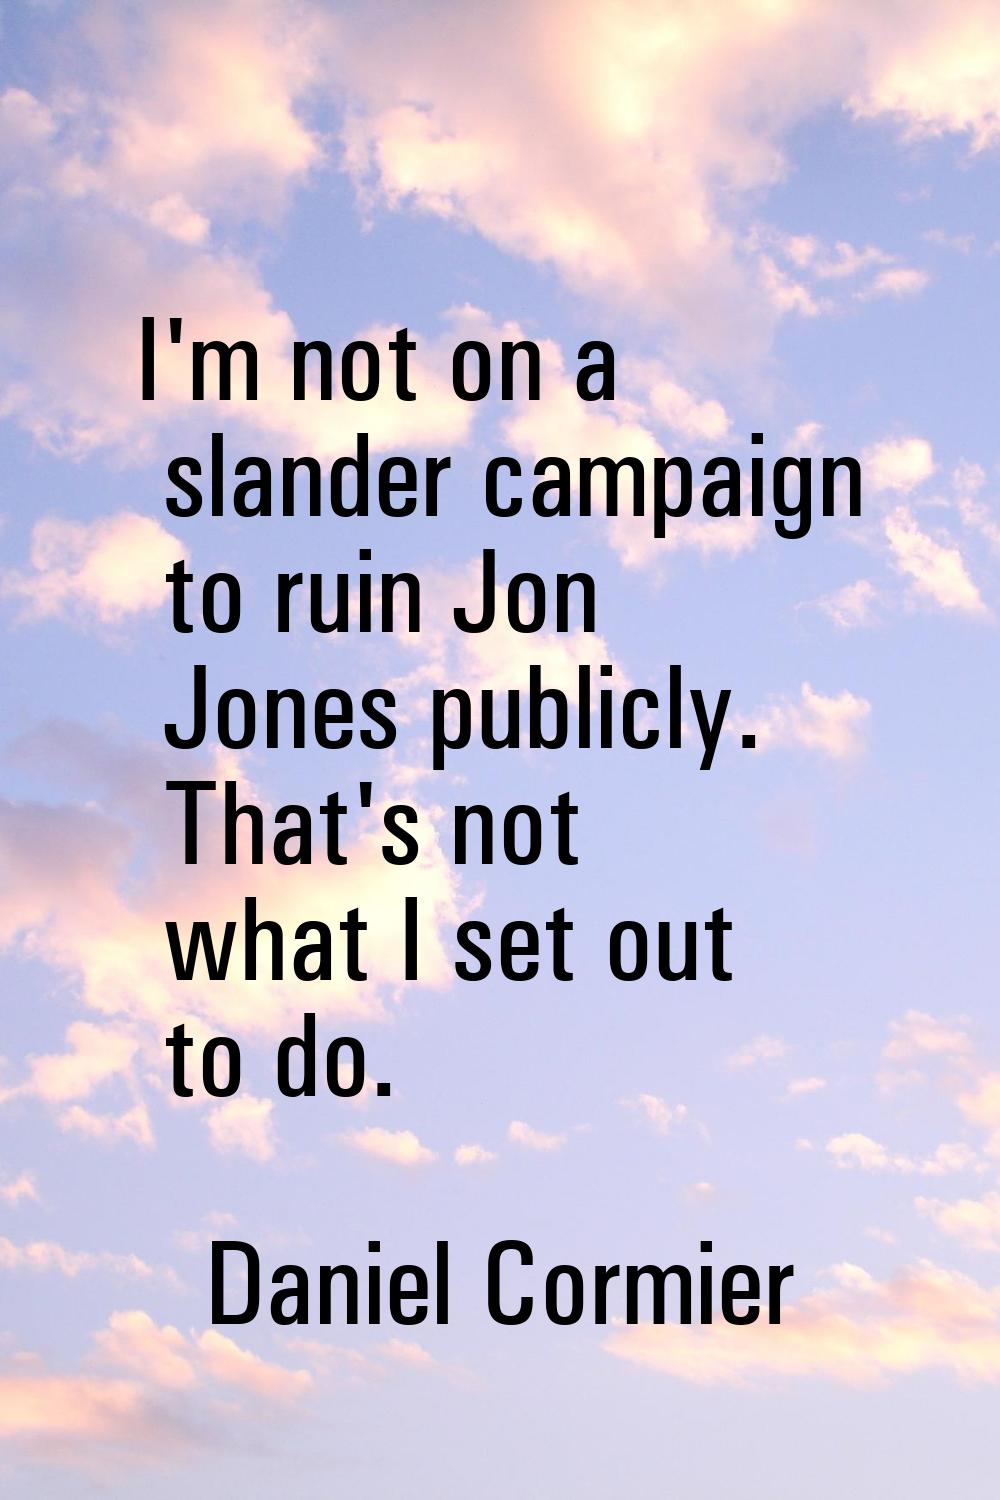 I'm not on a slander campaign to ruin Jon Jones publicly. That's not what I set out to do.